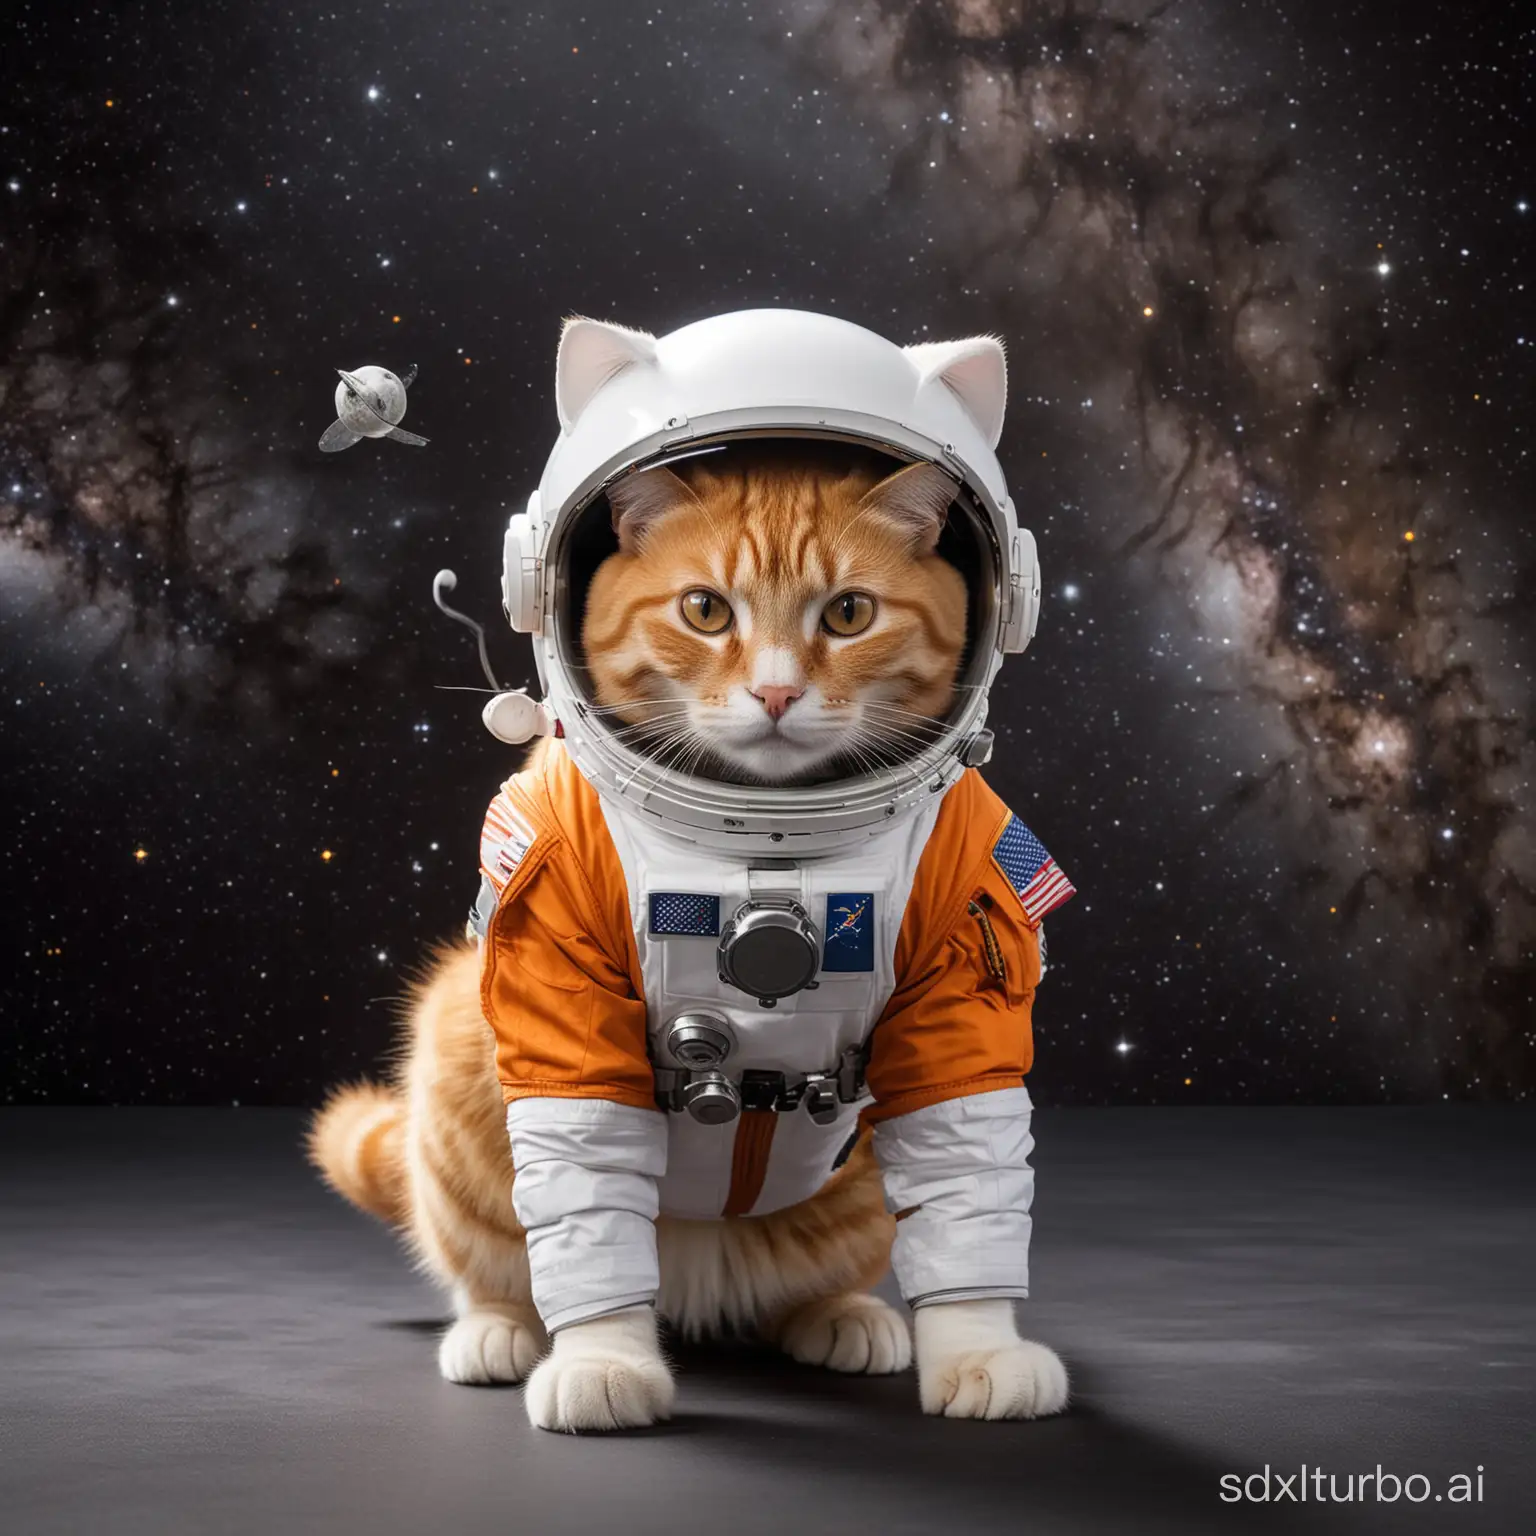 Orange cat with white stripey tail wearing an astronaut helmet and ifls on a spacerocket in deep space